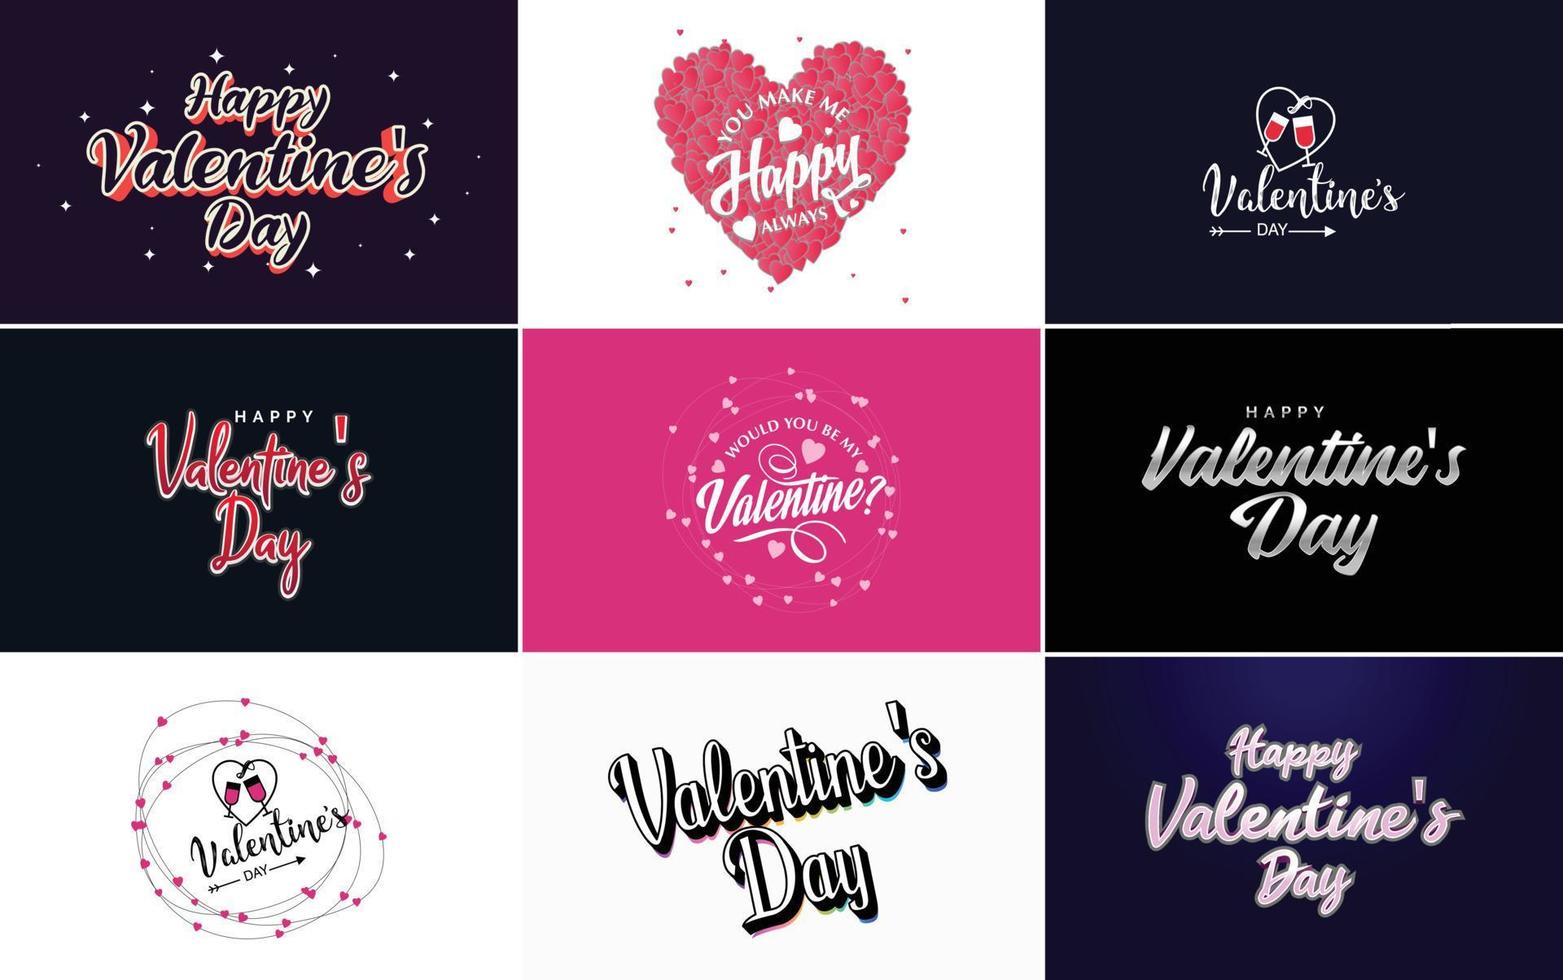 Happy Valentine's Day typography designs with heart wreaths vector